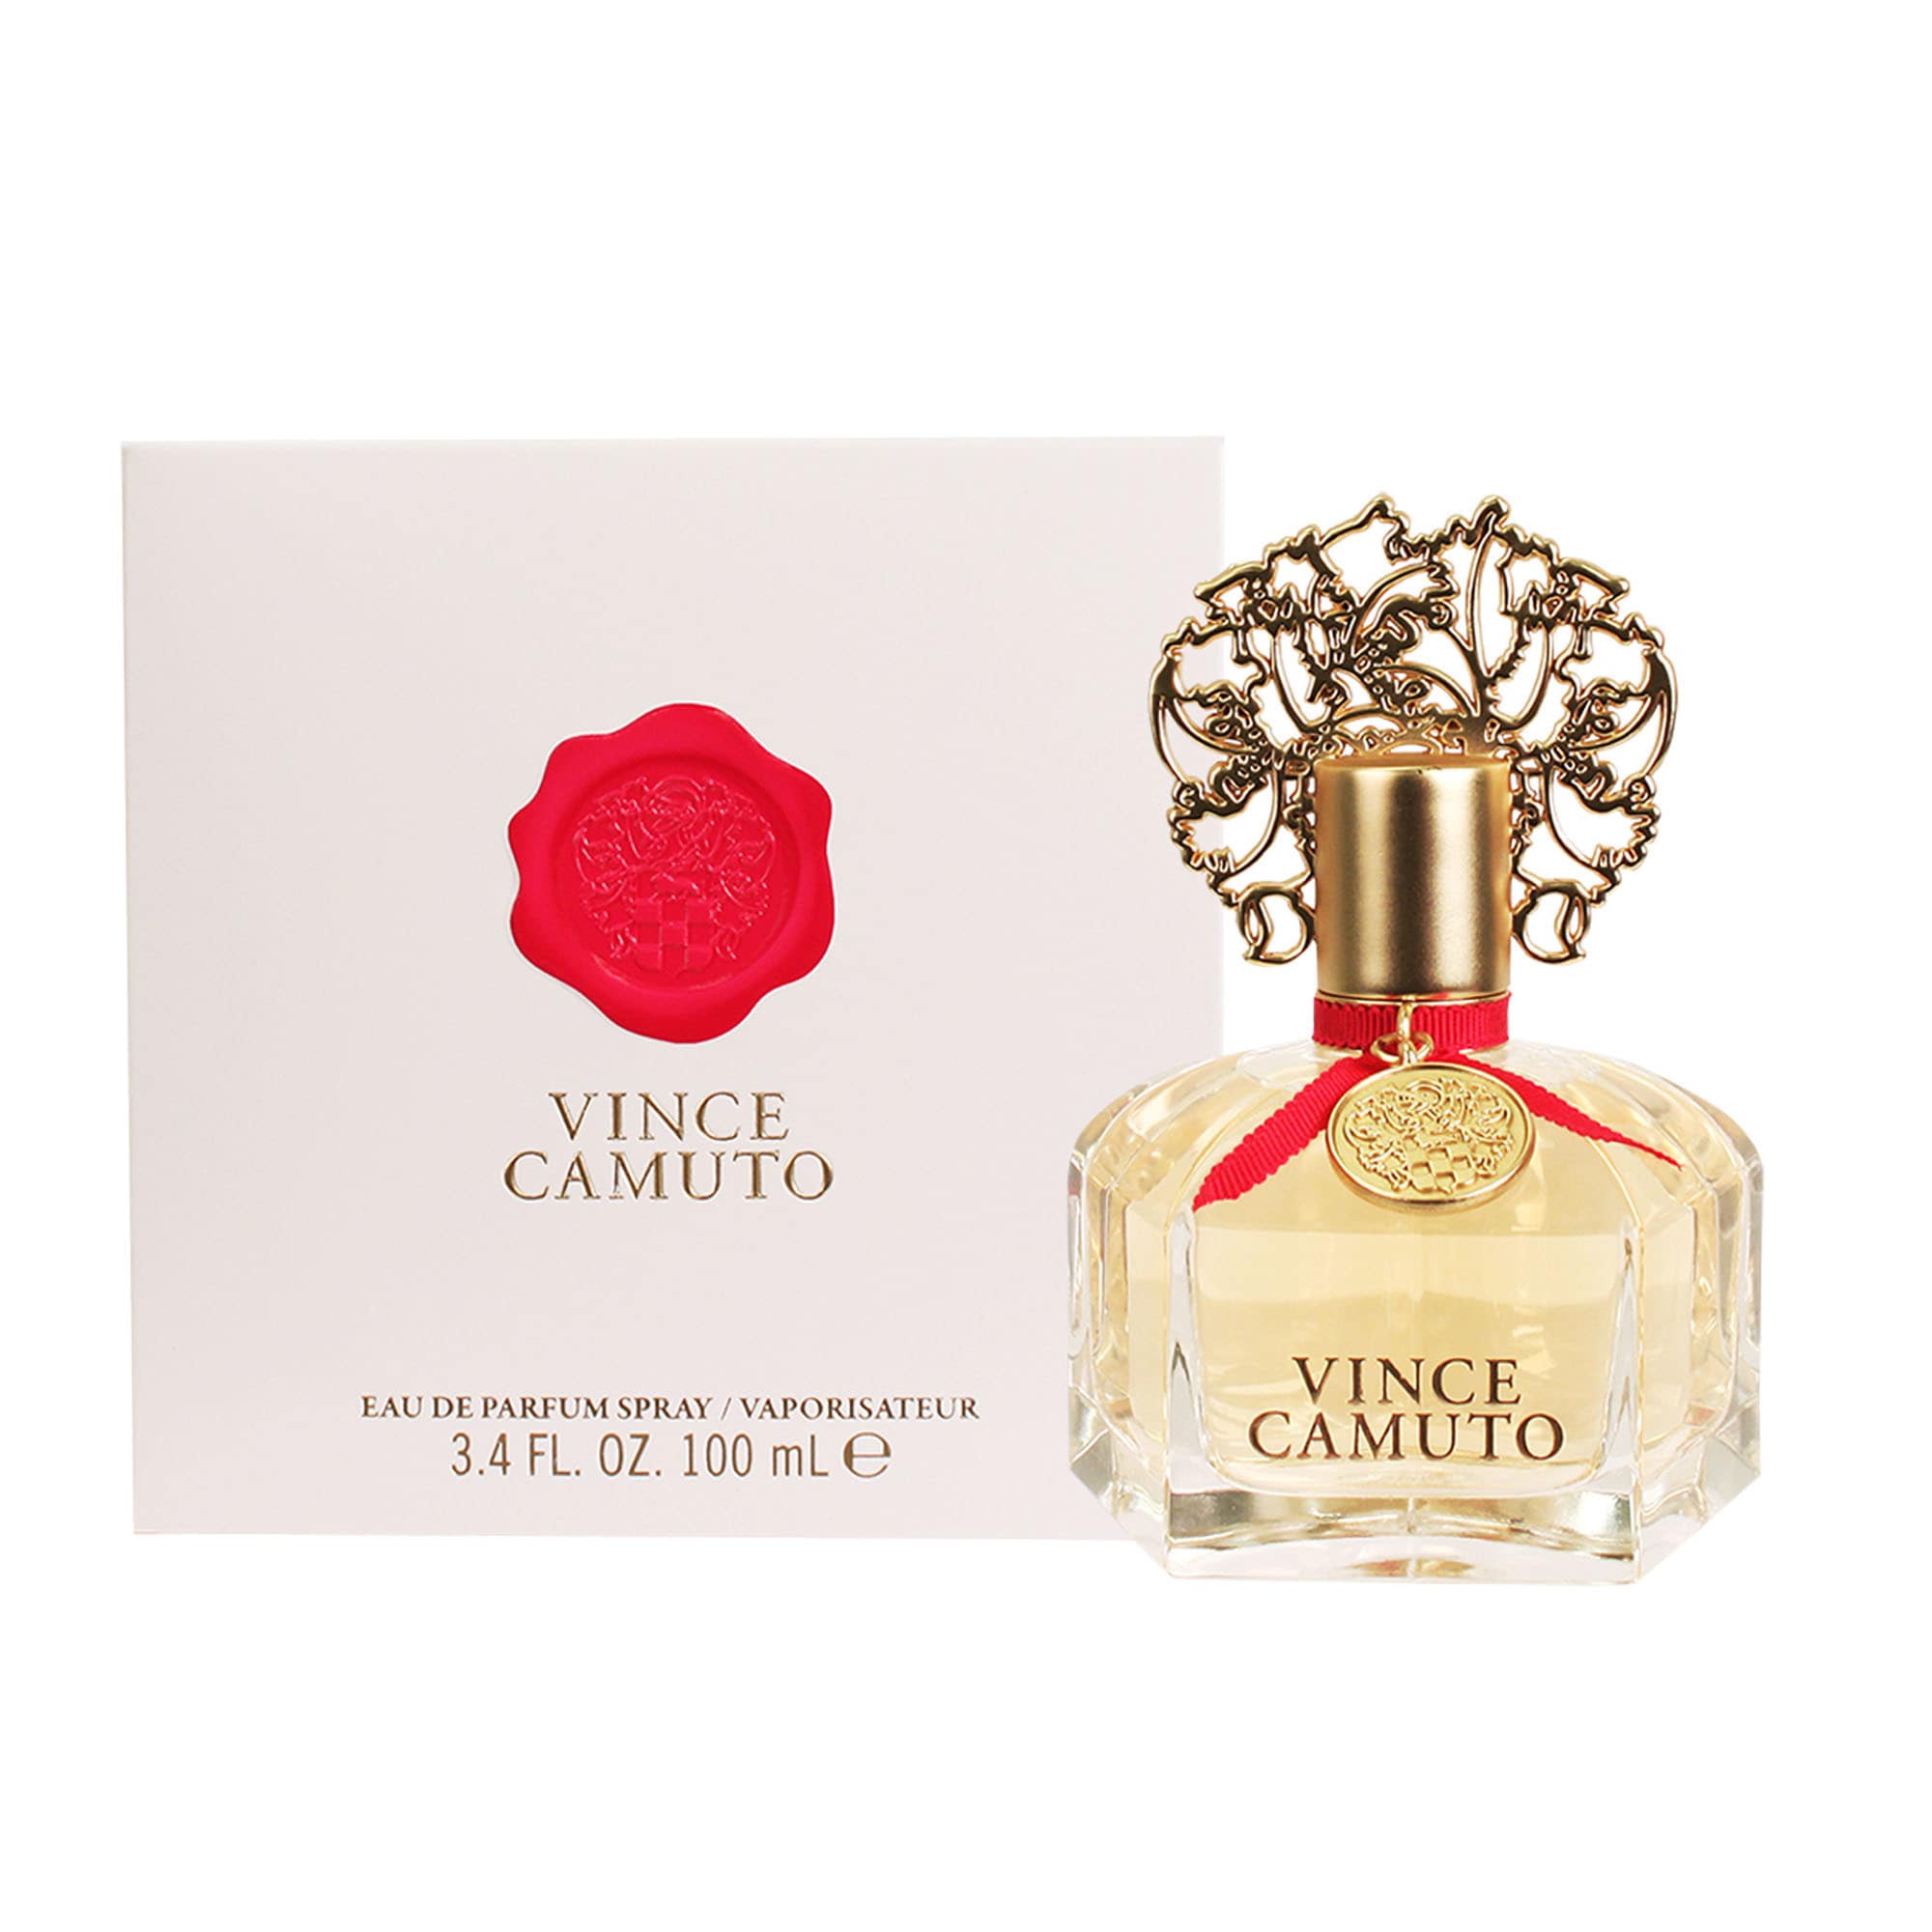 Camuto Ciao Vince Camuto 3-Piece Gift Set – Hair Care & Beauty